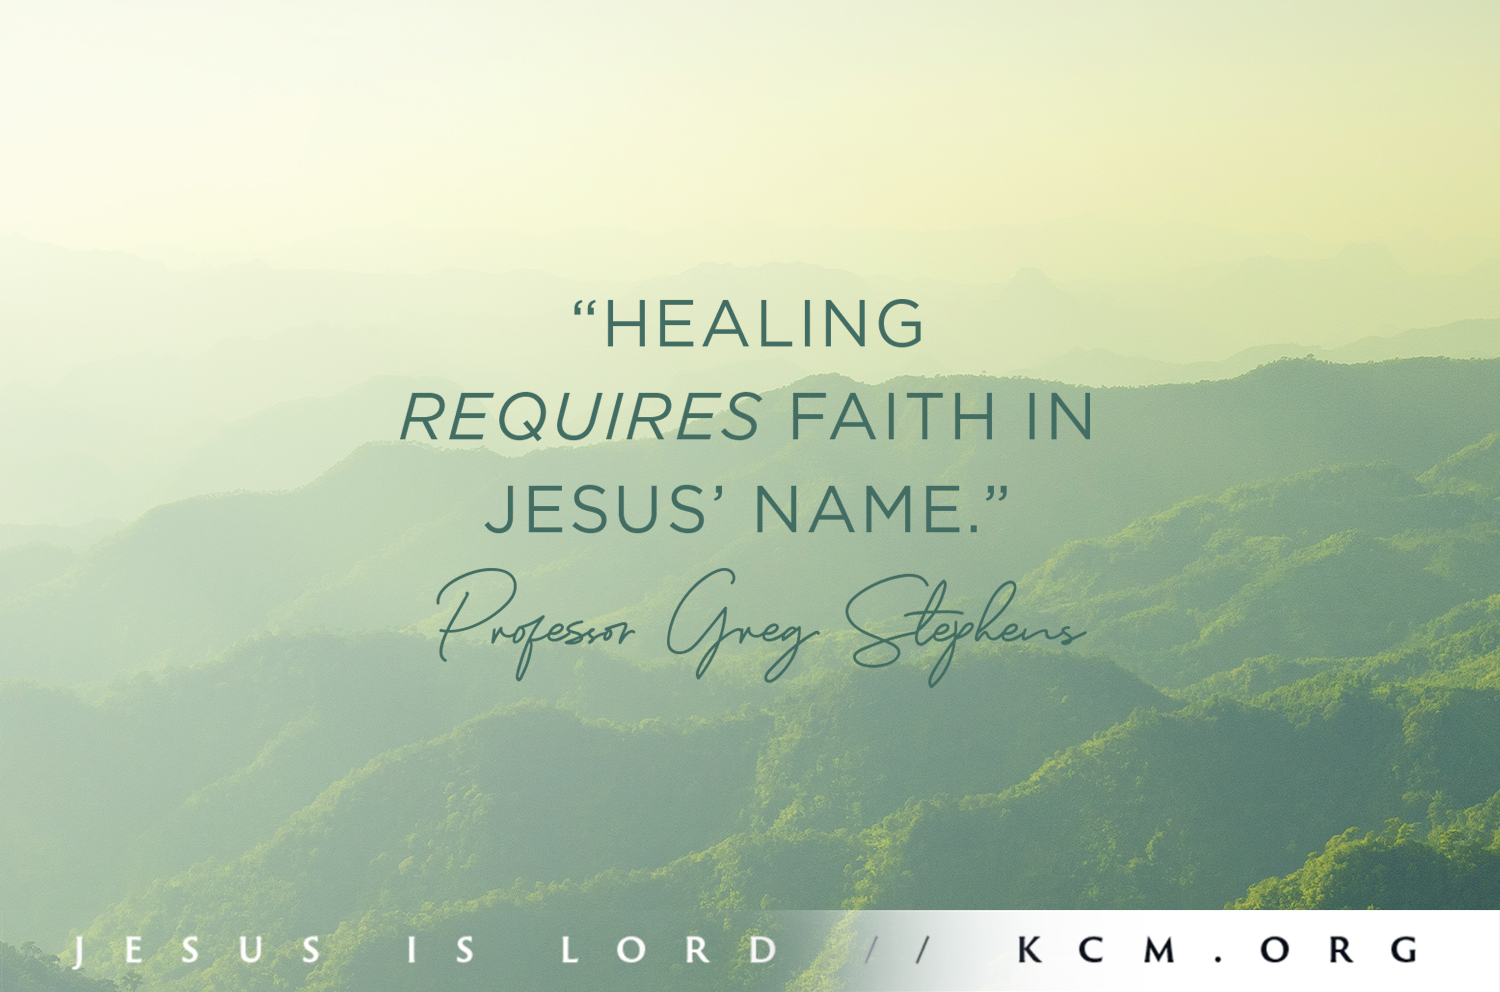 Healing requires faith in Jesus' name